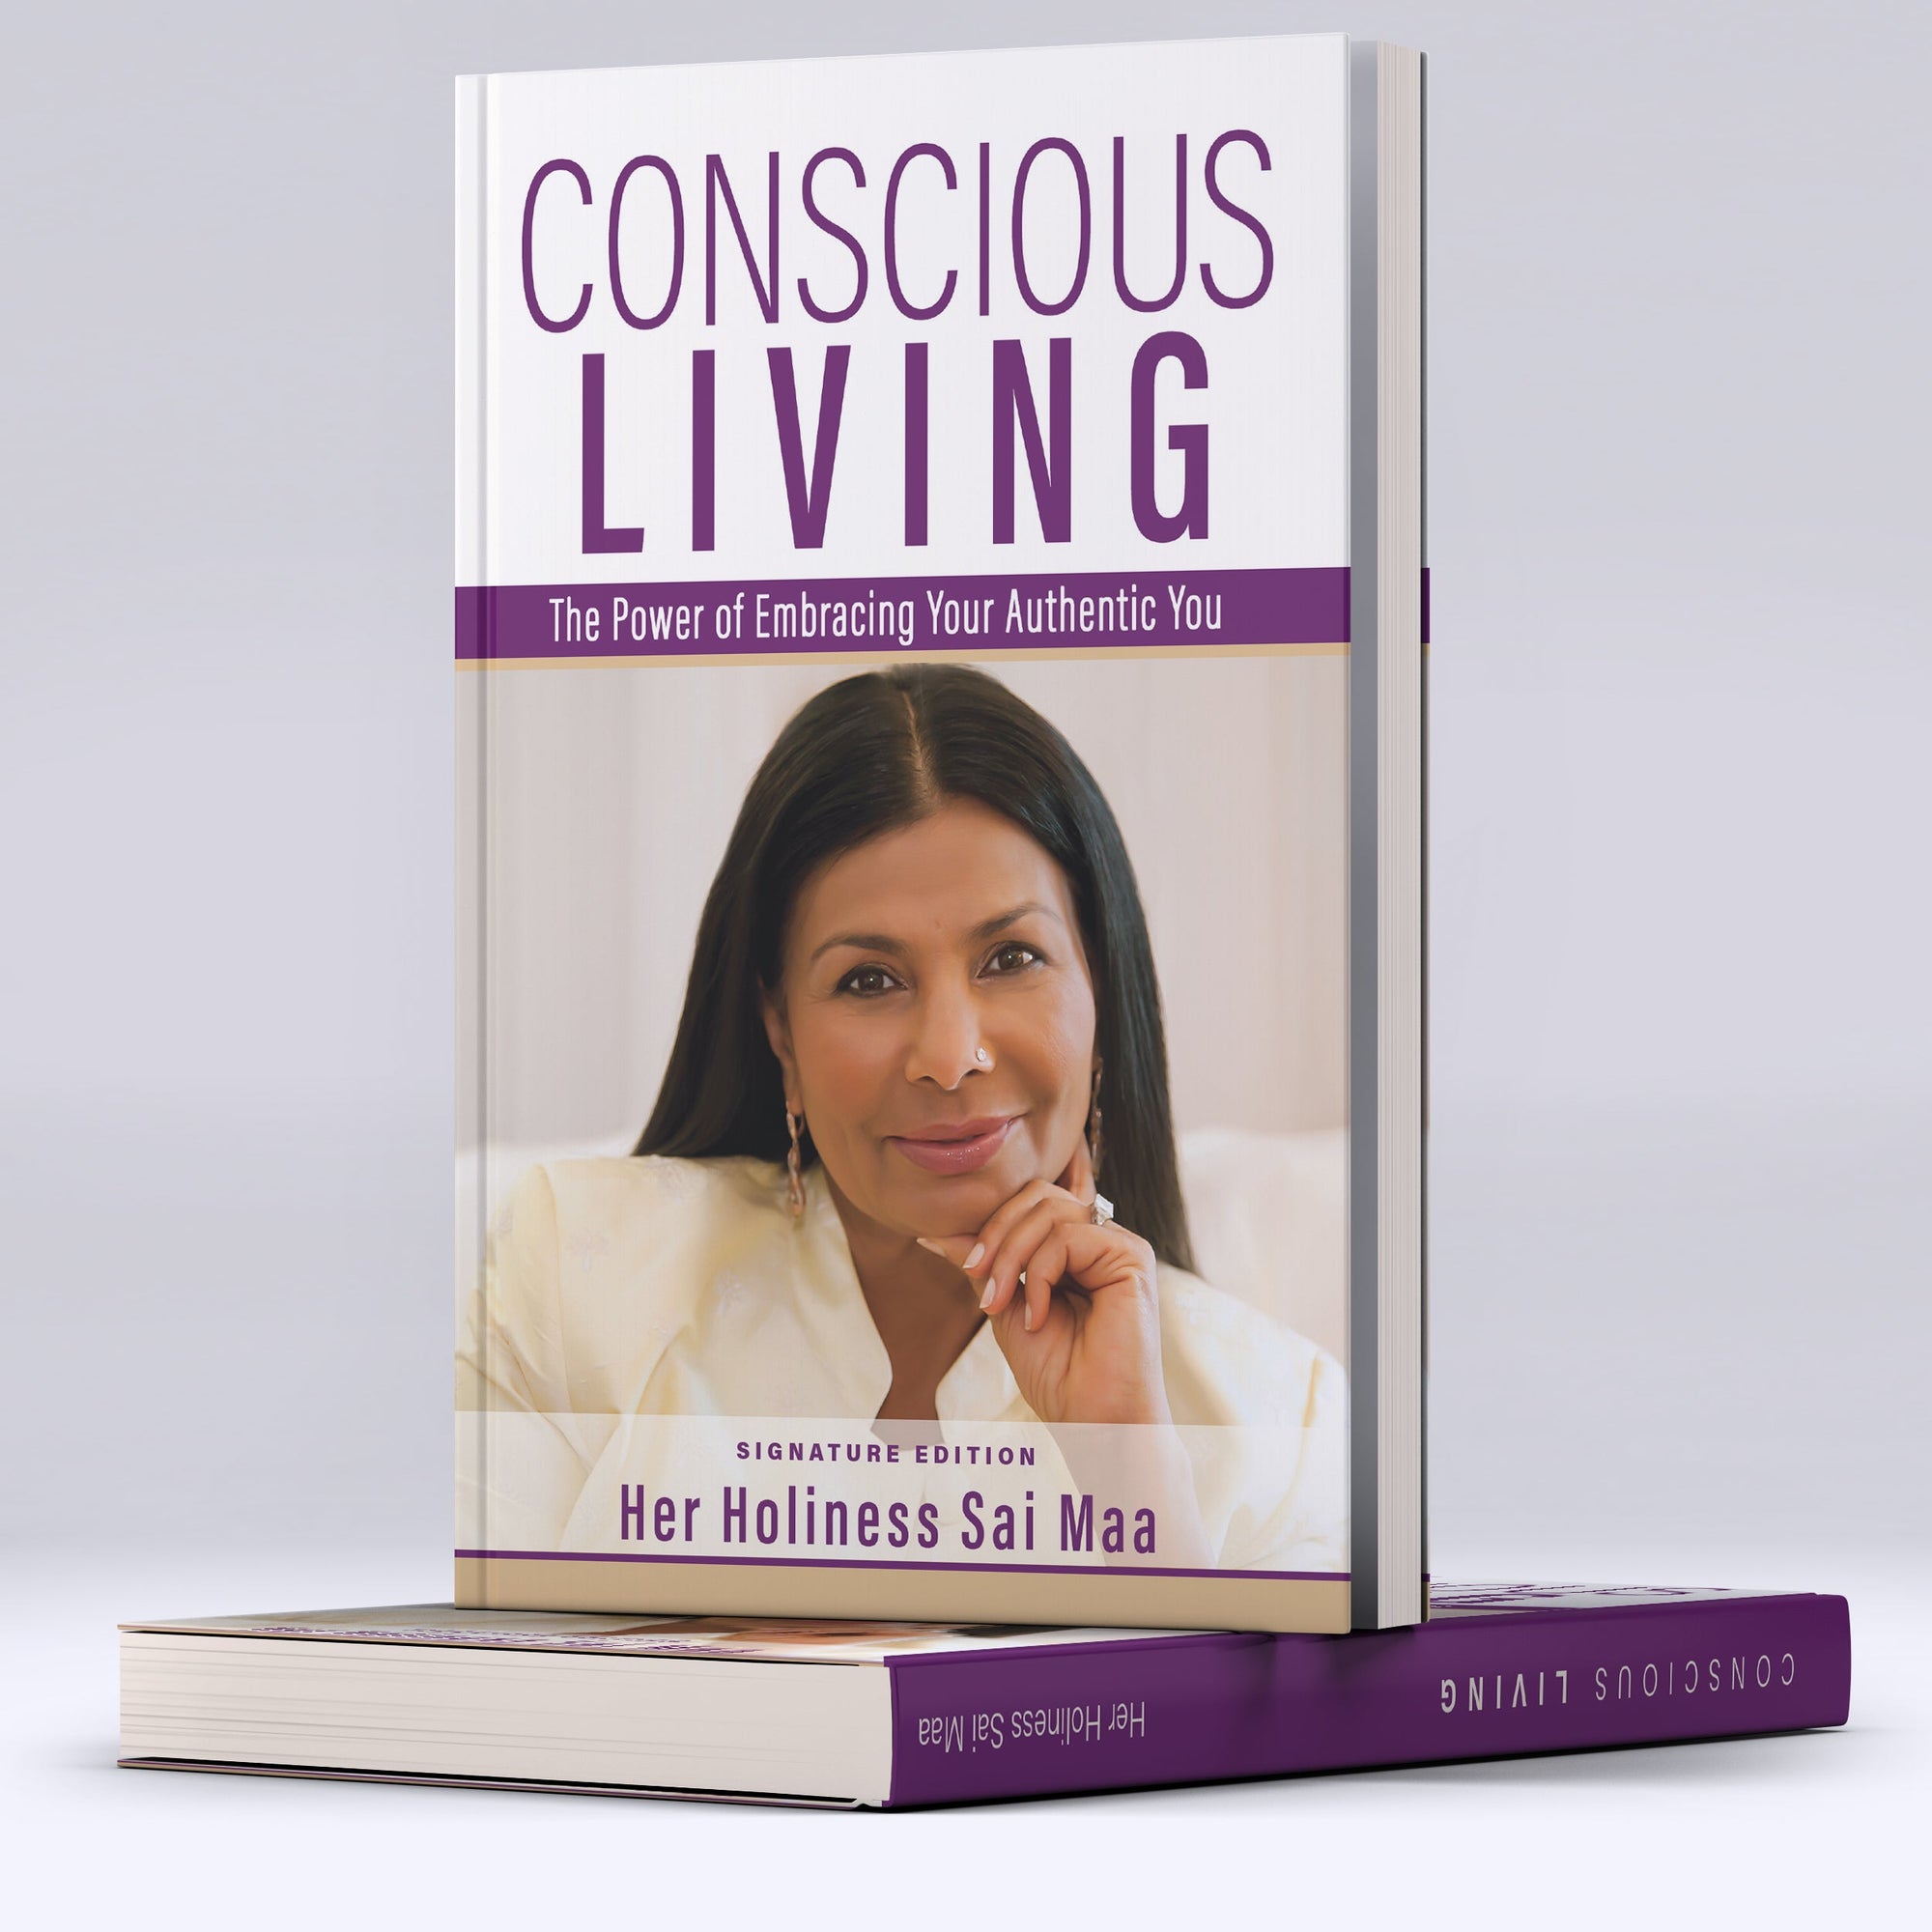 Conscious Living: The Power of Embracing Your Authentic You